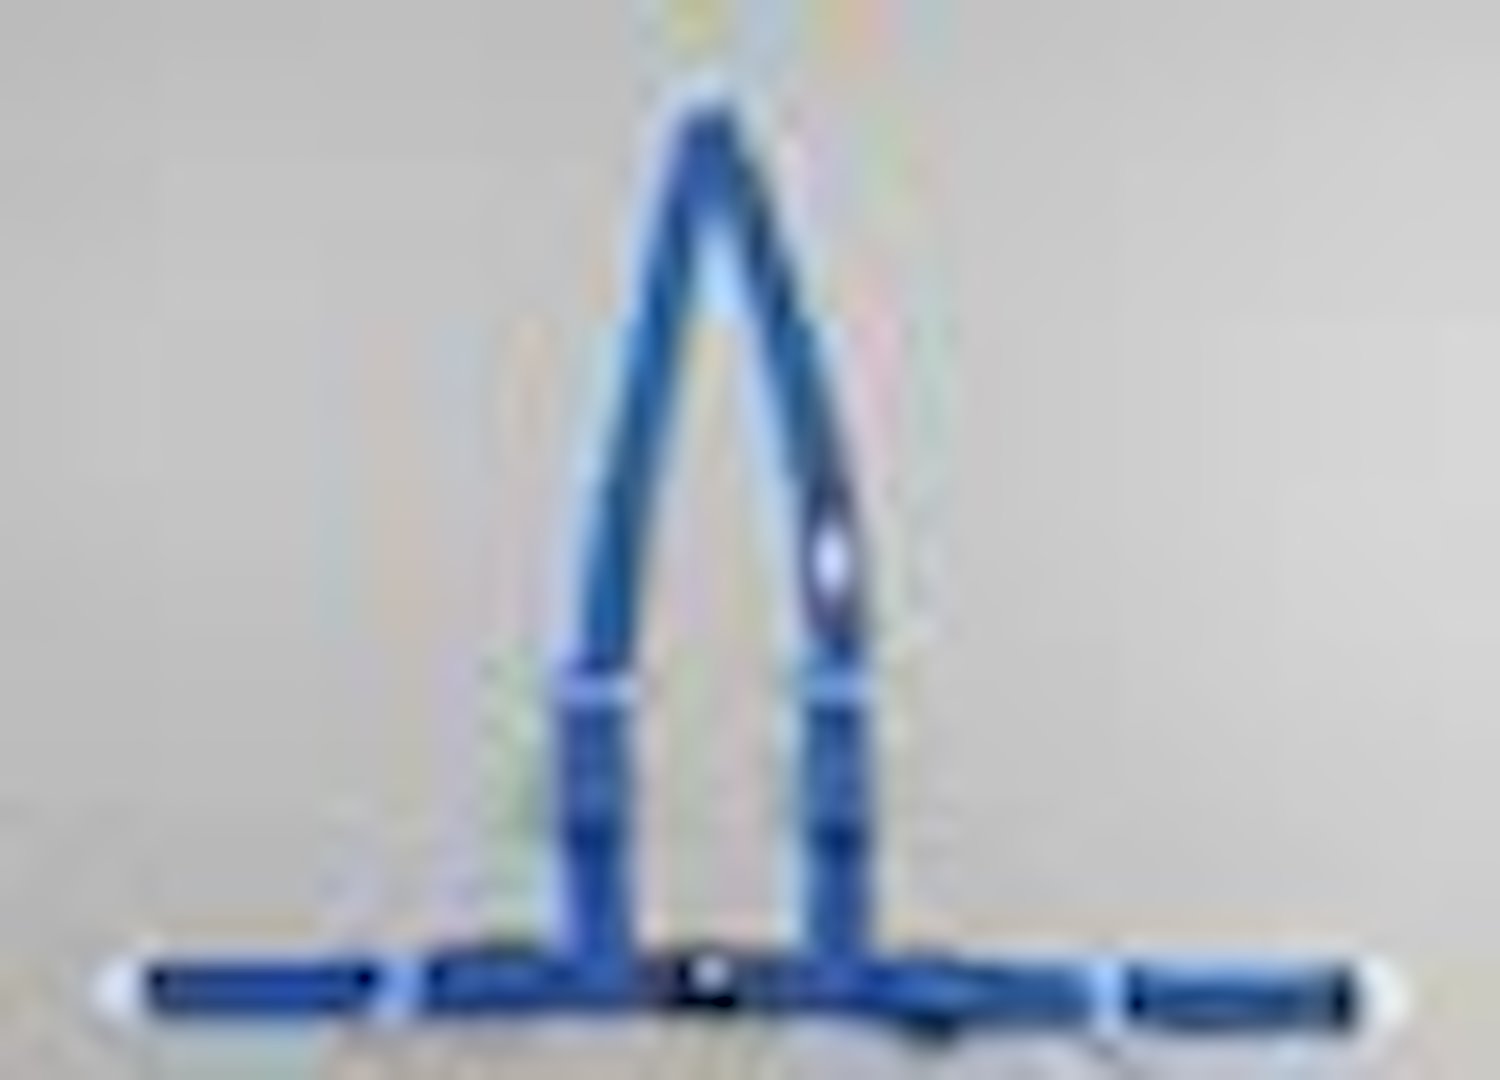 NON-SFI B&T HARNESS 2 PULL DOWN Lap Belt 2 S. H. V ROLL BAR Mount ALL SNAP ENDS BLUE